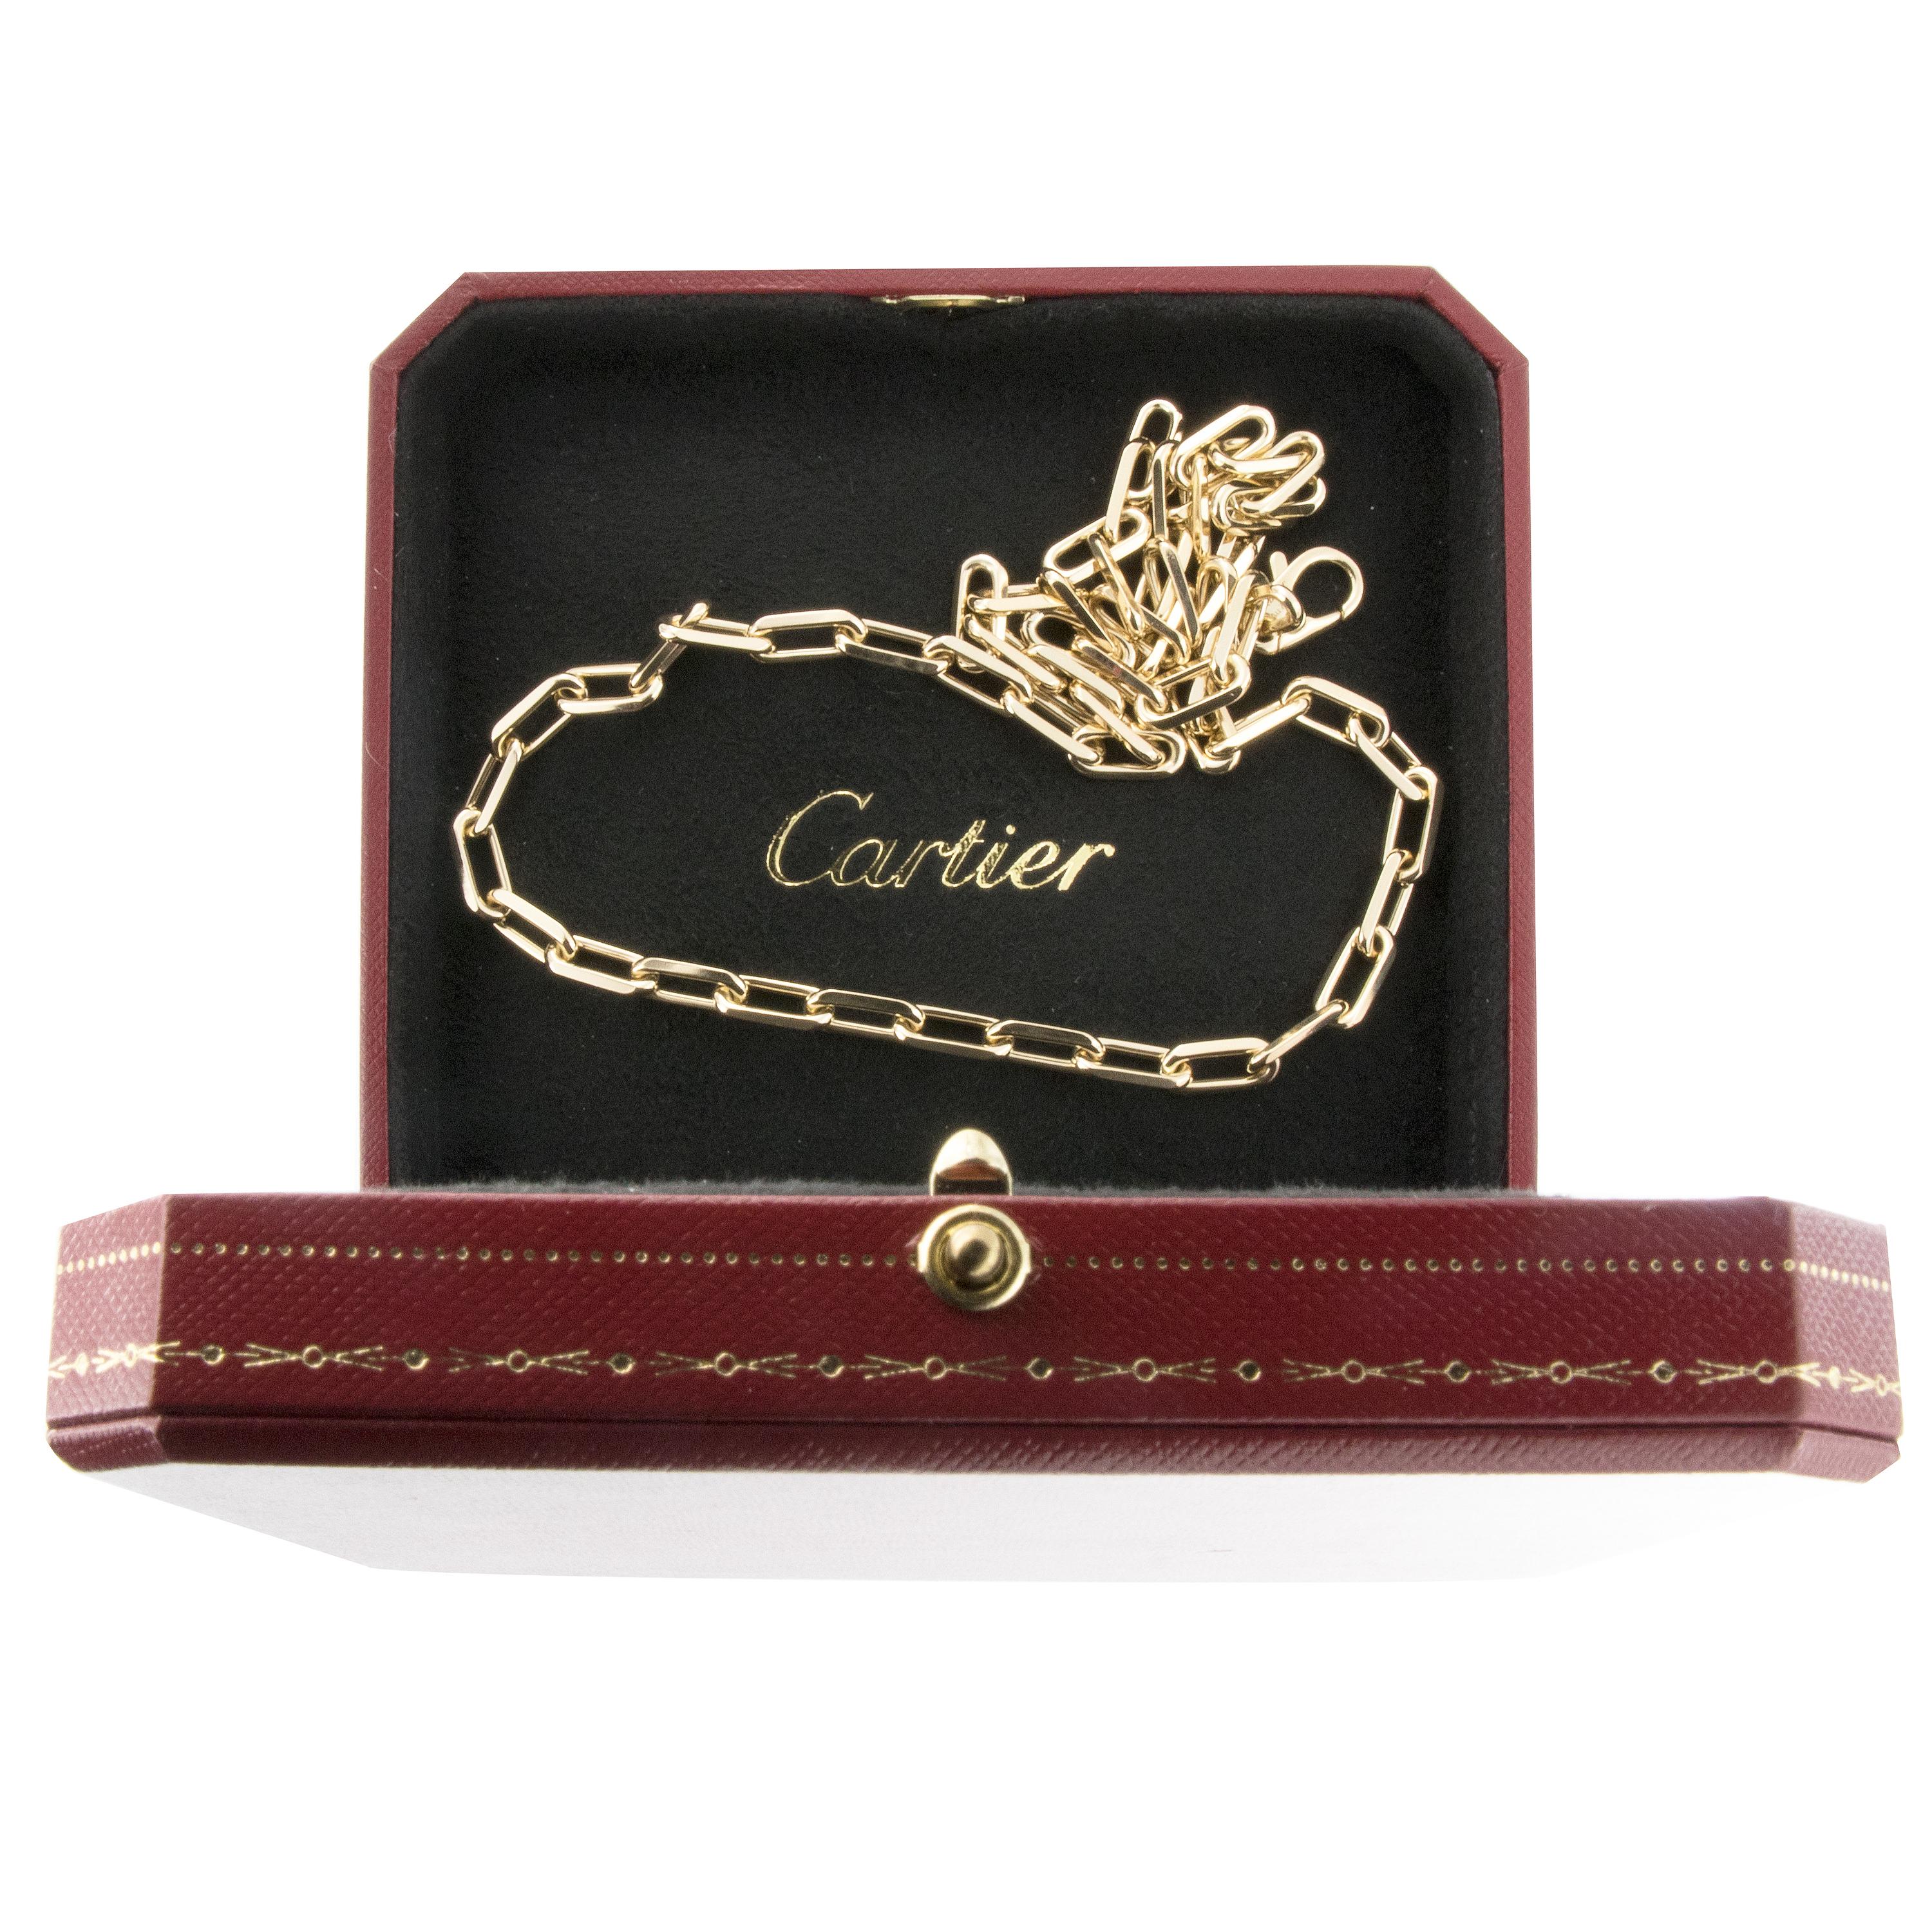 Iconic & recognizable necklace chain by Cartier with original box & papers. Cartier is one of the most prestigious jewelry manufacturers in the world with a long history for making jewelry for royalty. Why not own this timeless necklace & feel like